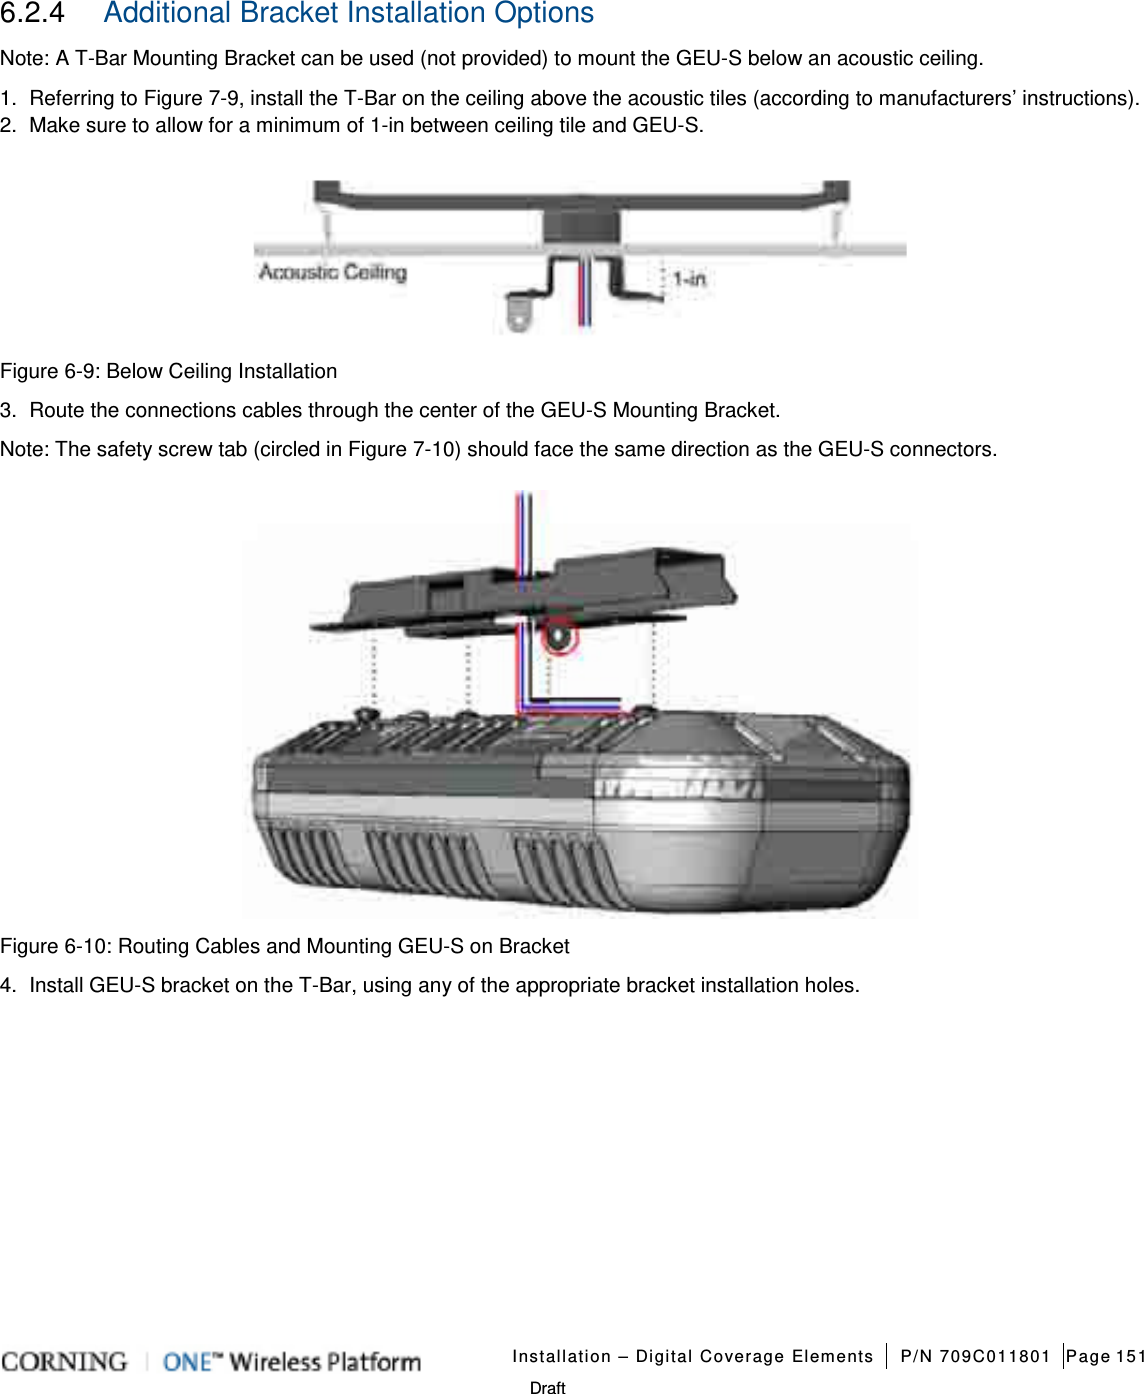   Installation – Digital Coverage Elements P/N 709C011801 Page 151   Draft 6.2.4  Additional Bracket Installation Options Note: A T-Bar Mounting Bracket can be used (not provided) to mount the GEU-S below an acoustic ceiling. 1.  Referring to Figure  7-9, install the T-Bar on the ceiling above the acoustic tiles (according to manufacturers’ instructions).   2.  Make sure to allow for a minimum of 1-in between ceiling tile and GEU-S.    Figure  6-9: Below Ceiling Installation 3.  Route the connections cables through the center of the GEU-S Mounting Bracket. Note: The safety screw tab (circled in Figure  7-10) should face the same direction as the GEU-S connectors.  Figure  6-10: Routing Cables and Mounting GEU-S on Bracket 4.  Install GEU-S bracket on the T-Bar, using any of the appropriate bracket installation holes.      